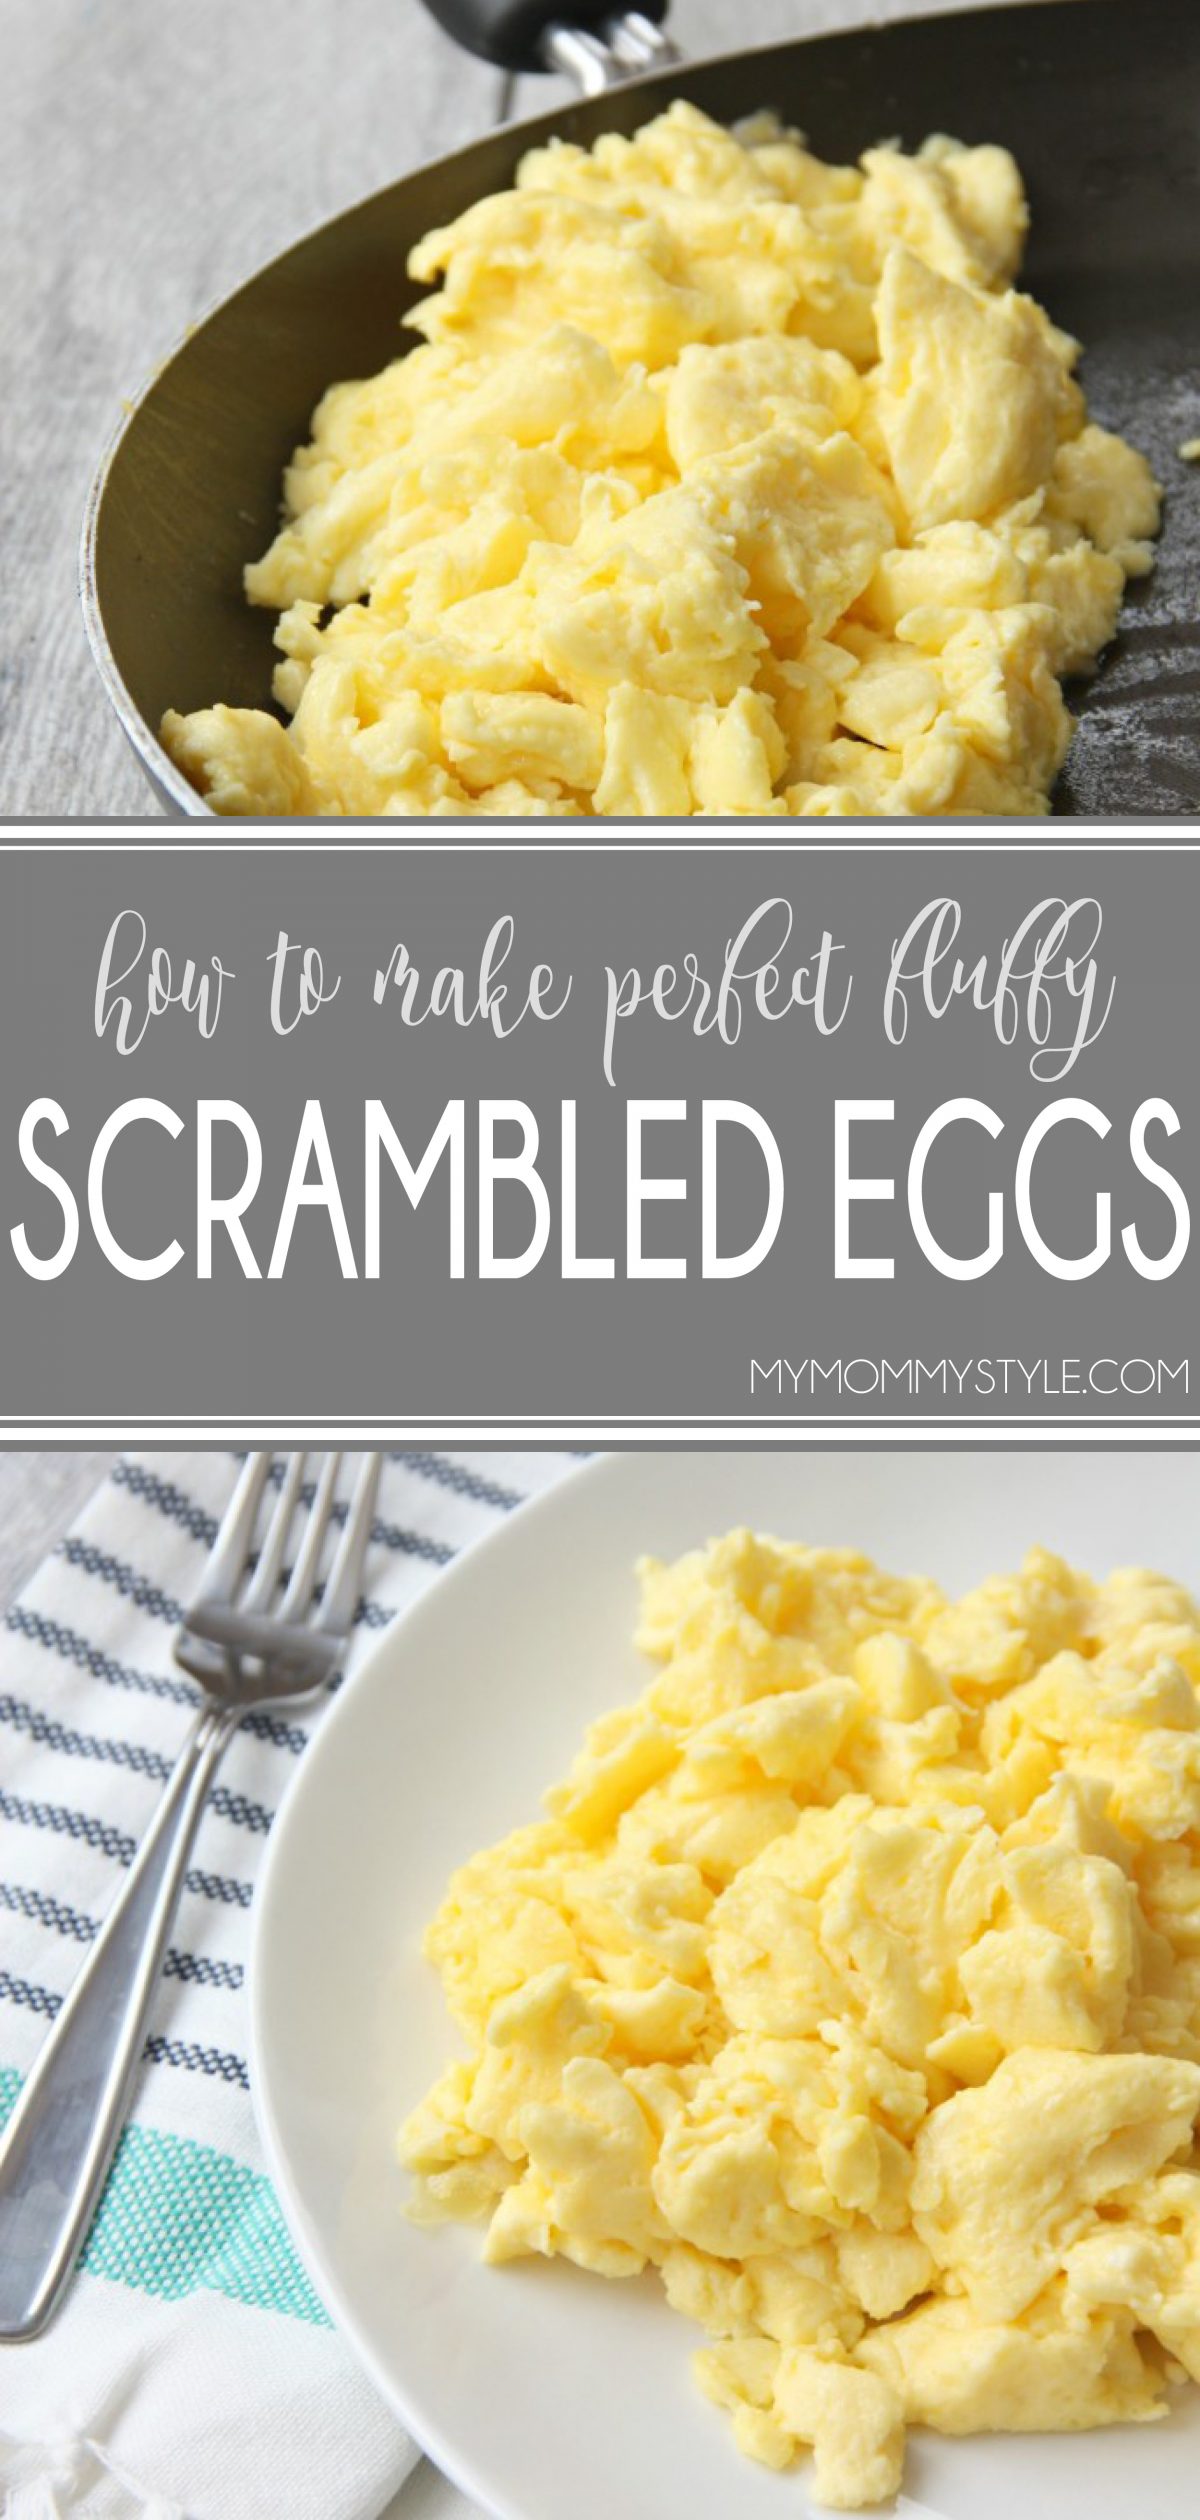 I know, I know, scrambled eggs are considered an easy dish to make, but there was a time long ago when I didn't know the secrets of perfect egg scrambling and chances are there are others out there. via @mymommystyle